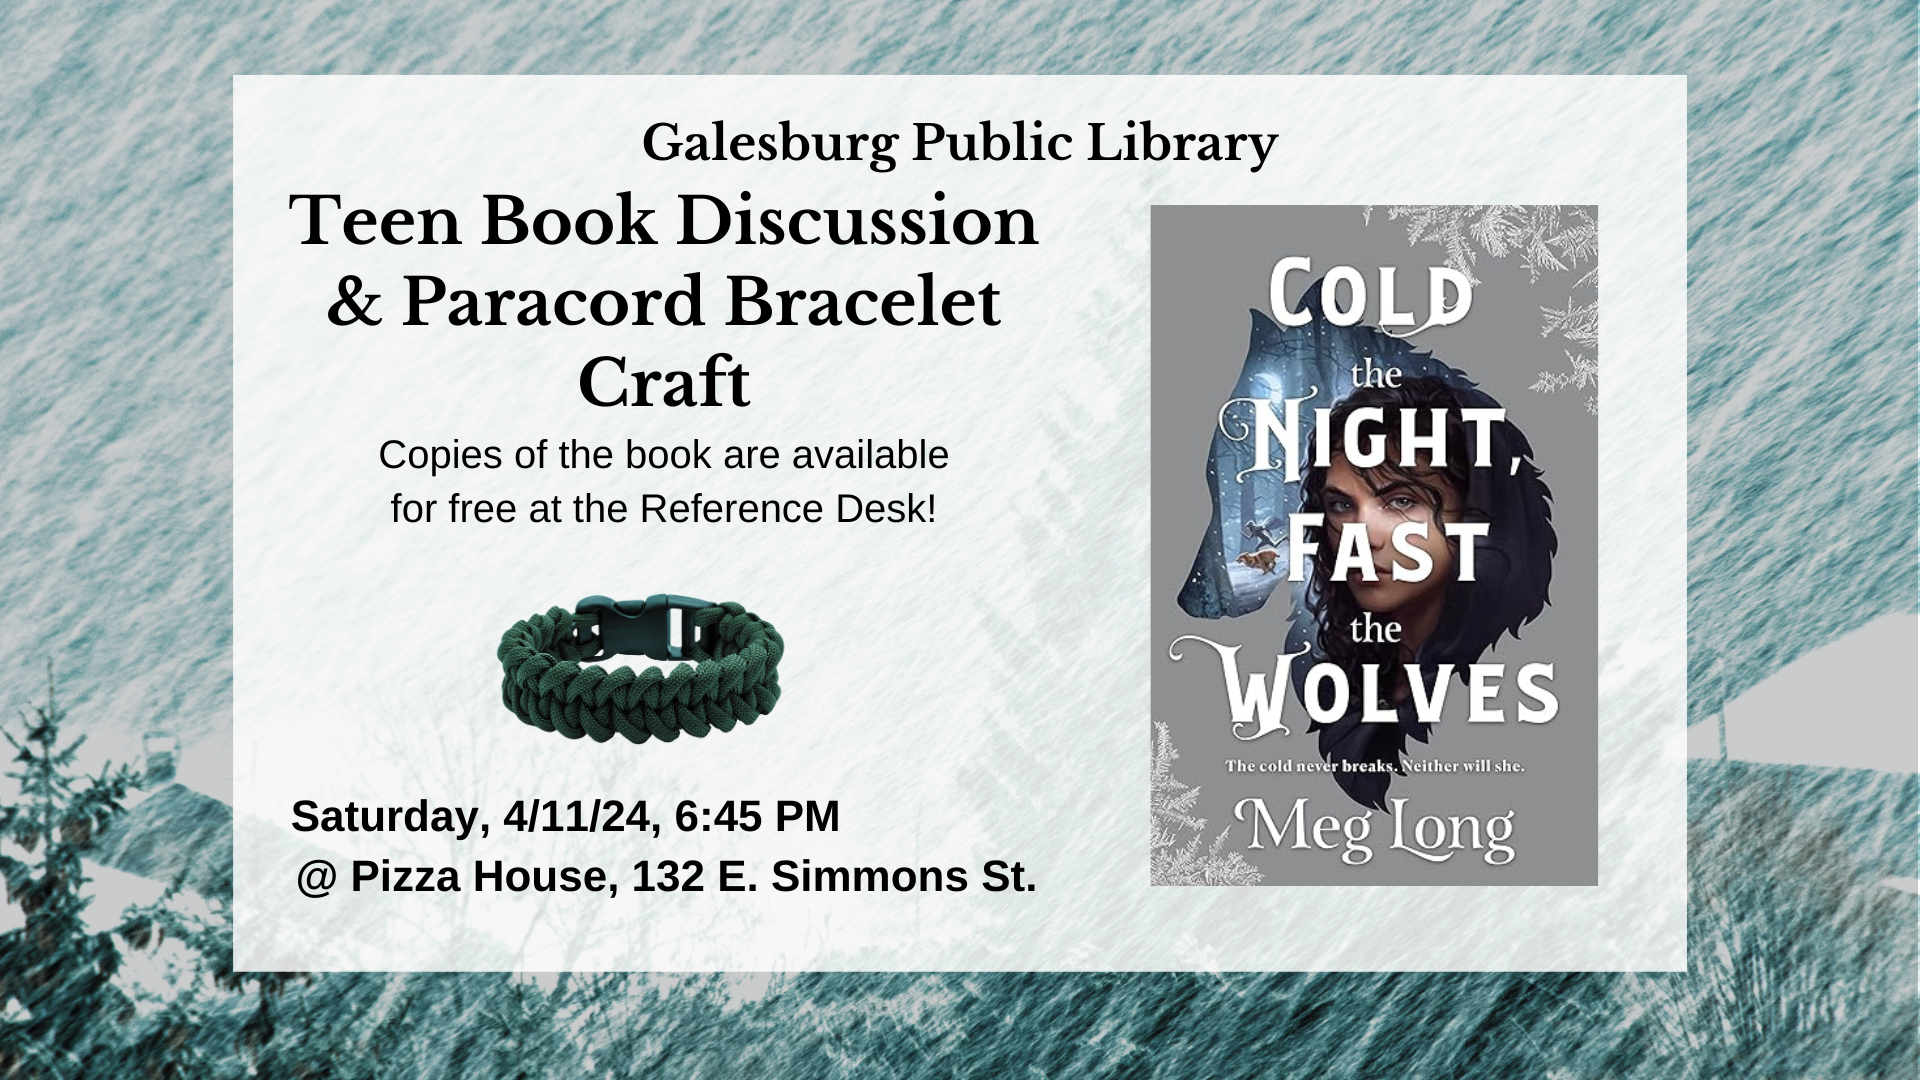 Galesburg Public Library Teen Book Discussion and Paracord Bracelet Craft. Copies of the book Cold the Night, Fast the Wolves by Meg Long are available for free at the Reference Desk! Saturday, 4/11/24, 6:45 PM at Pizza House, 132 E. Simmons Street